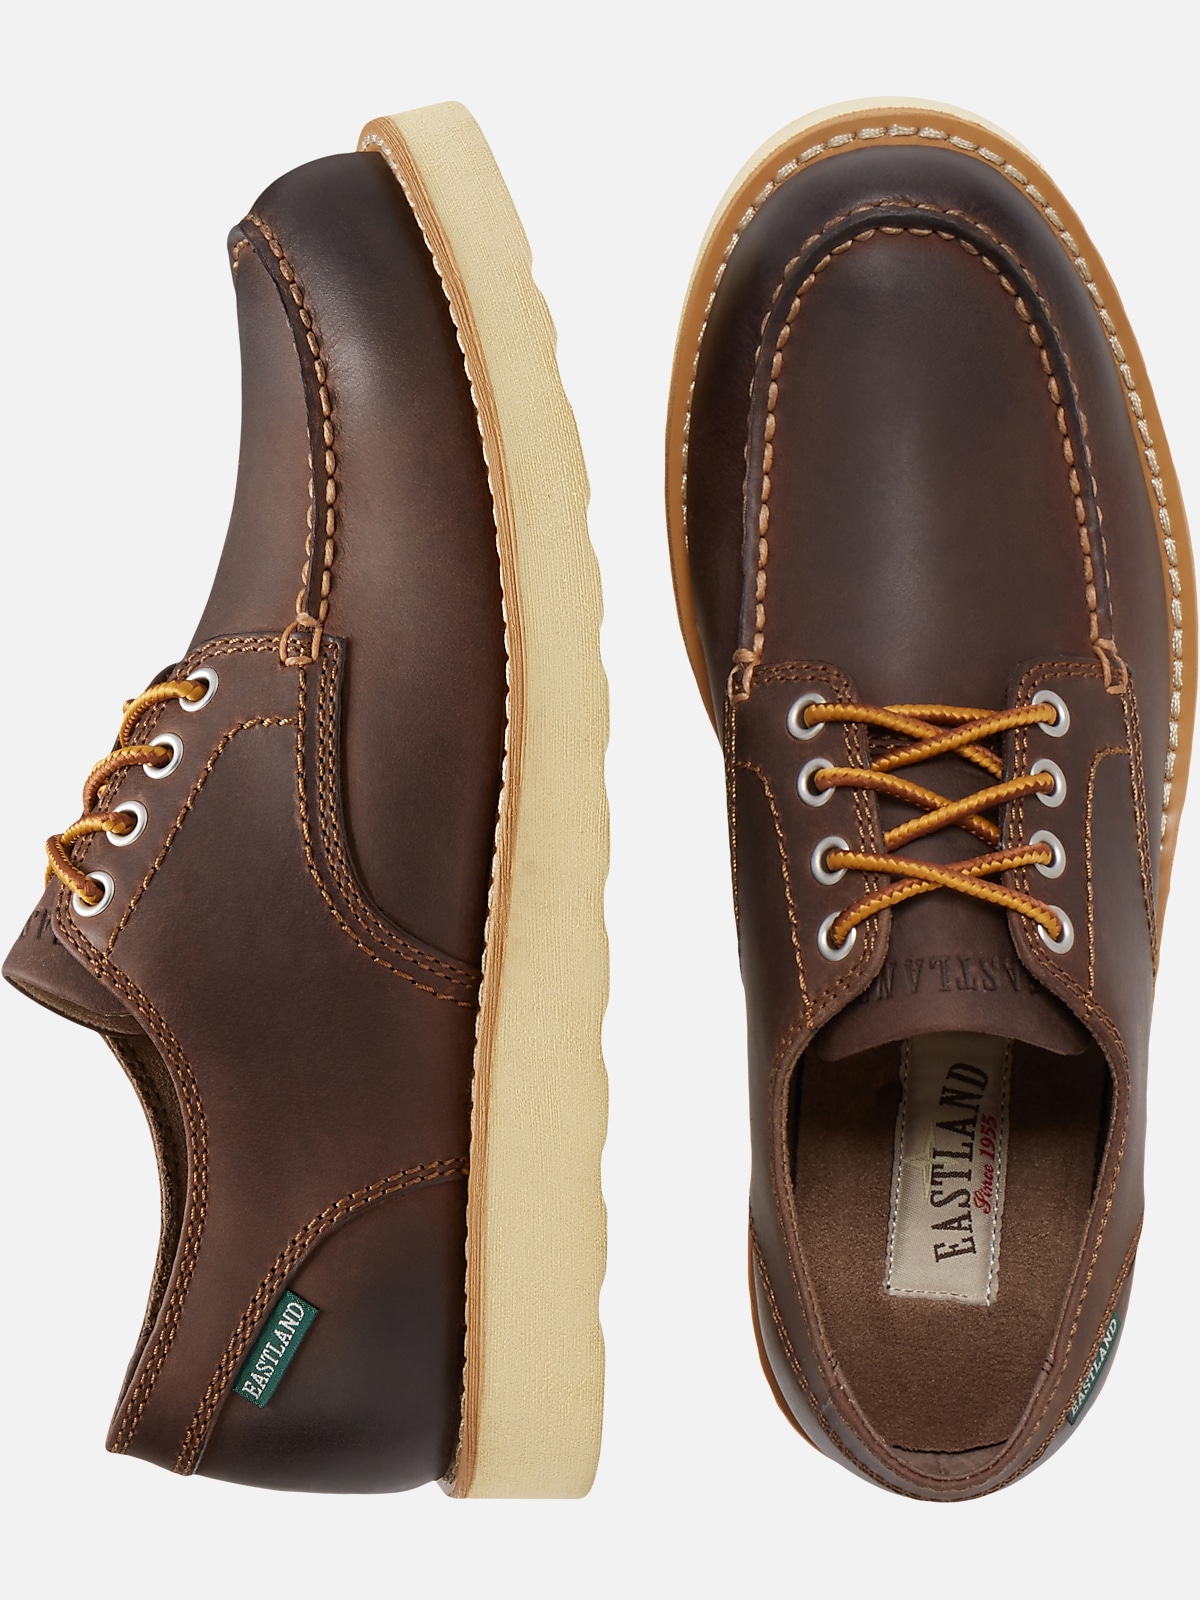 Eastland Lumber Down Moc Toe Oxfords | All Clearance $39.99| Men's ...